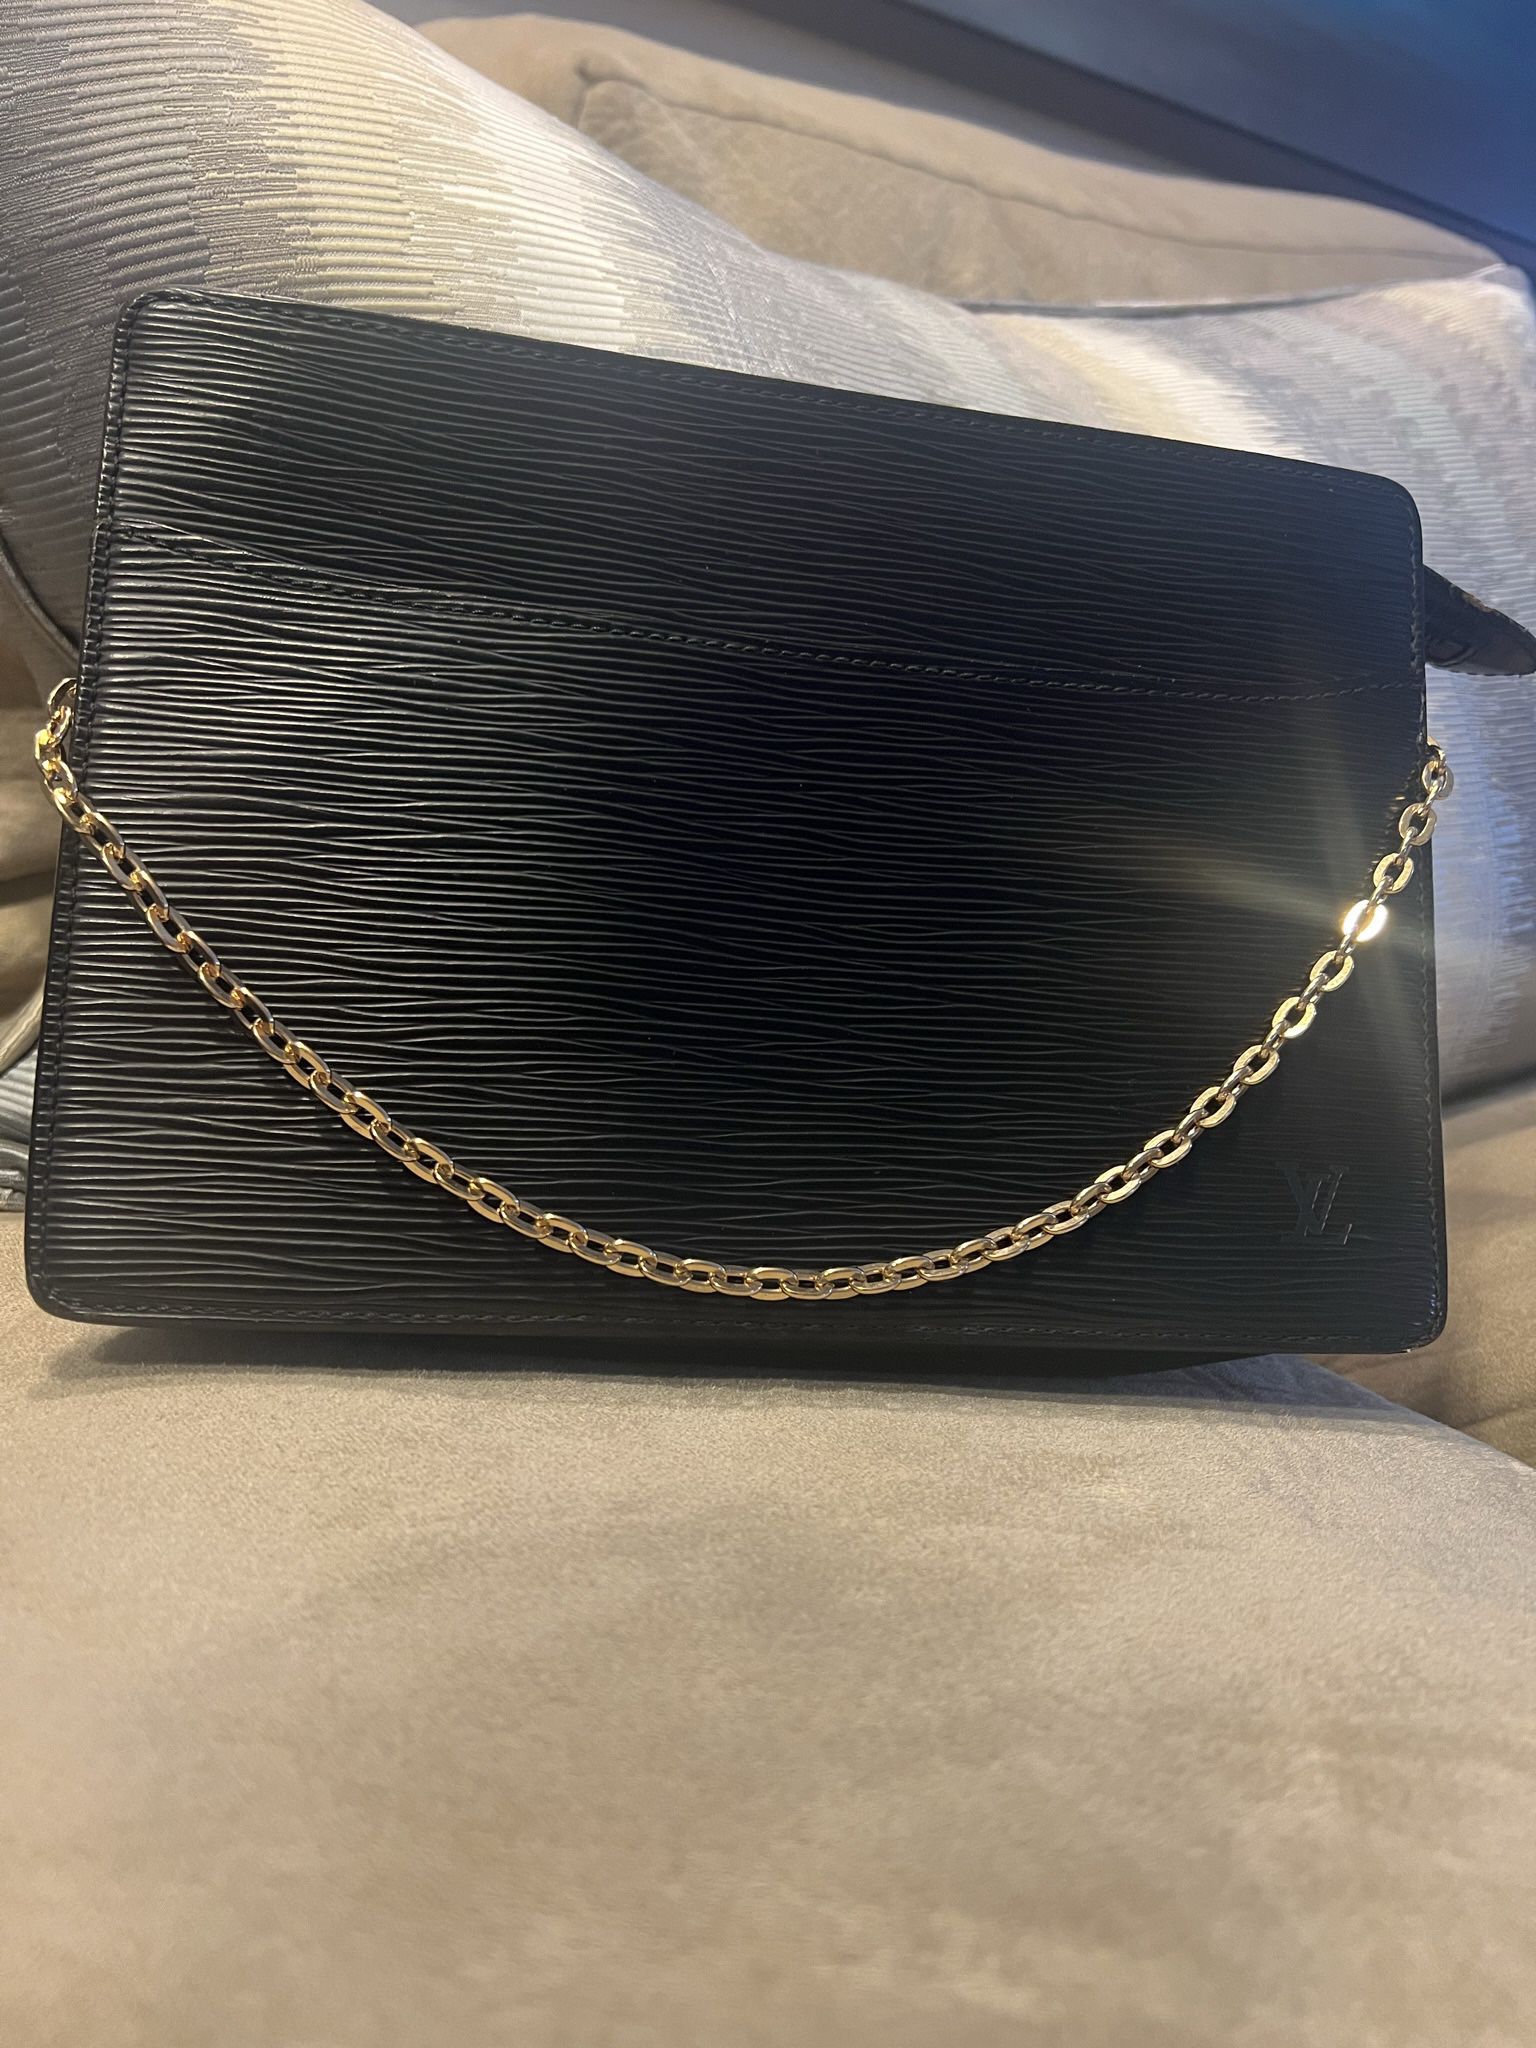 LV Félicie Pochette for Sale in Kissimmee, FL - OfferUp